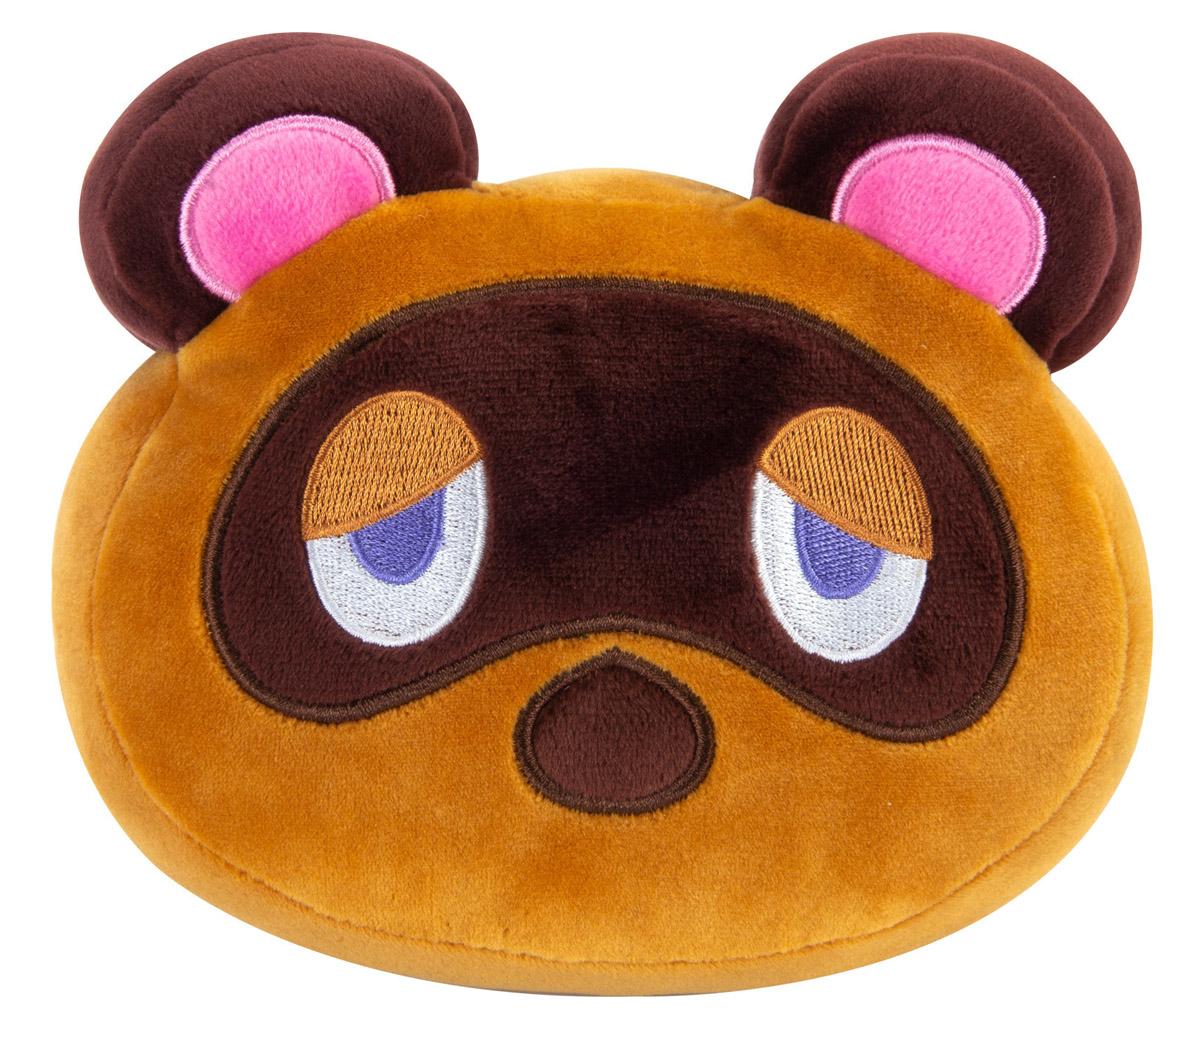 Club Mocchi-Mocchi Animal Crossing 6in Plush Stuffed Toys for $5.99